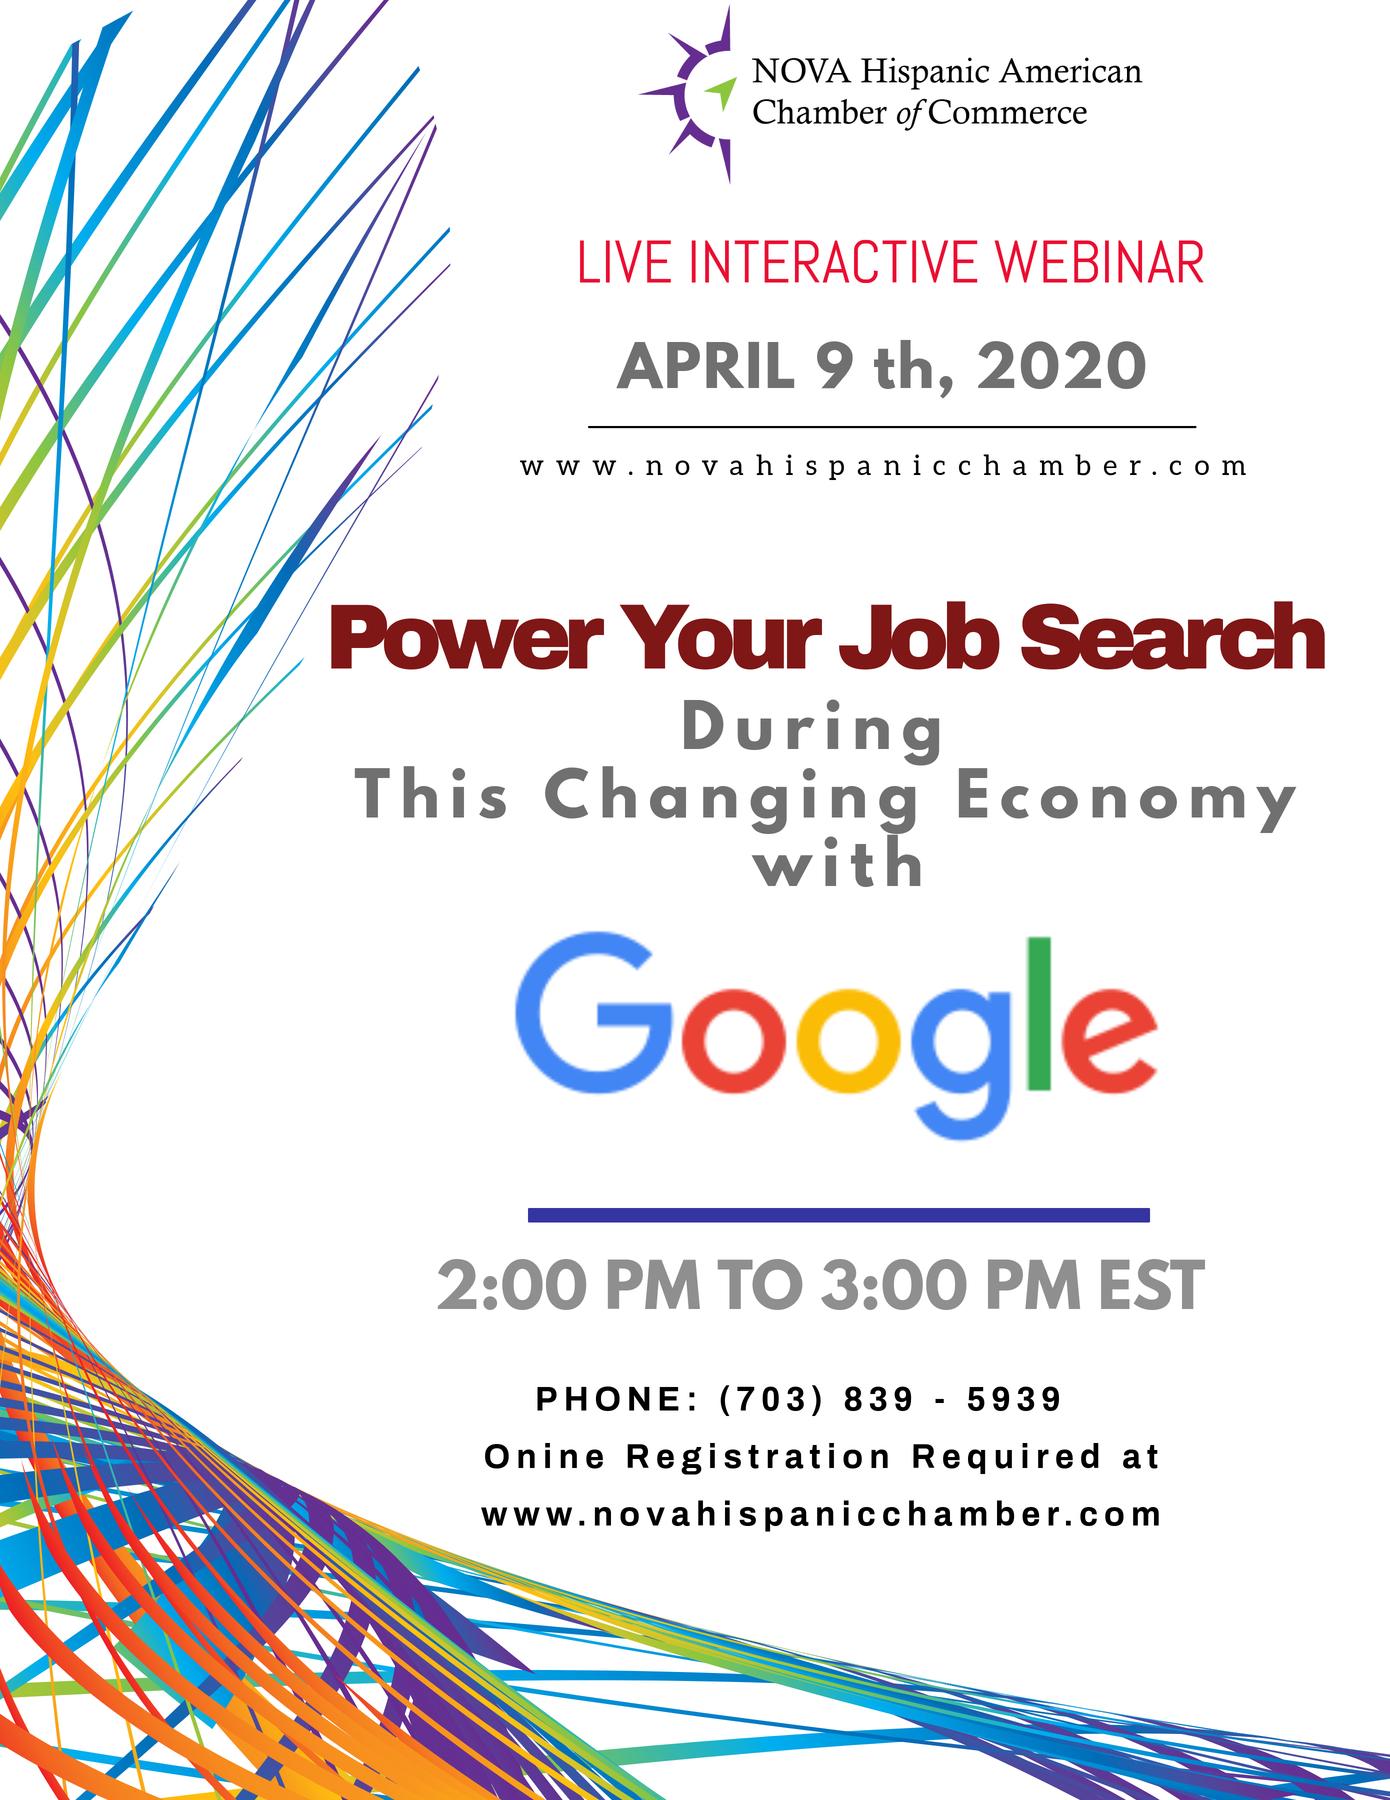 Power Your Job Search During A Changing Economy